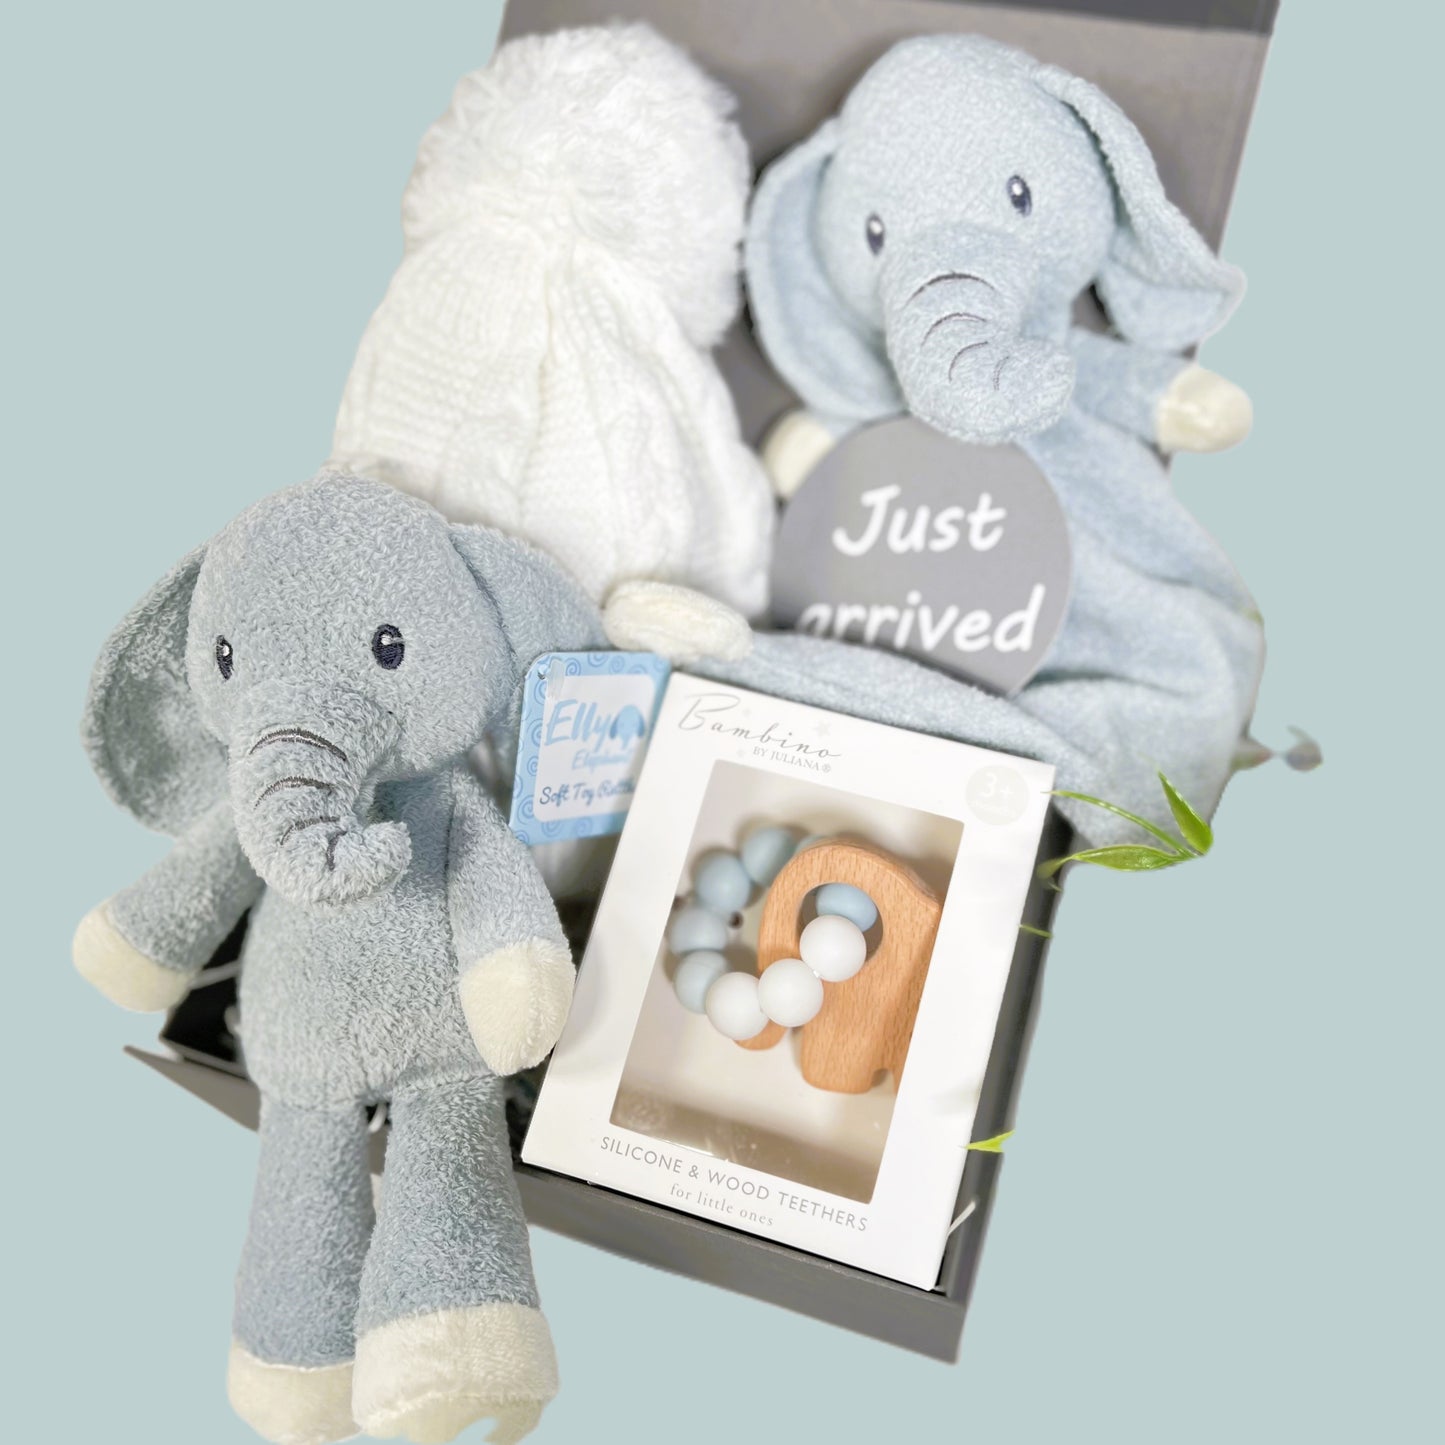 Blue and white new baby boy hamper contained in a grey baby keepsake box, a Blue and white elephant rattle toy with embroidered eyes and trunk and a matching Ely elephant baby blankie comforter. A white baby pompom hat made from recycled plastics, a "Just arrived" baby photography disc and a Bambino silicone and beech wood baby teether in blue and white with a wooden elephant shaped teether.